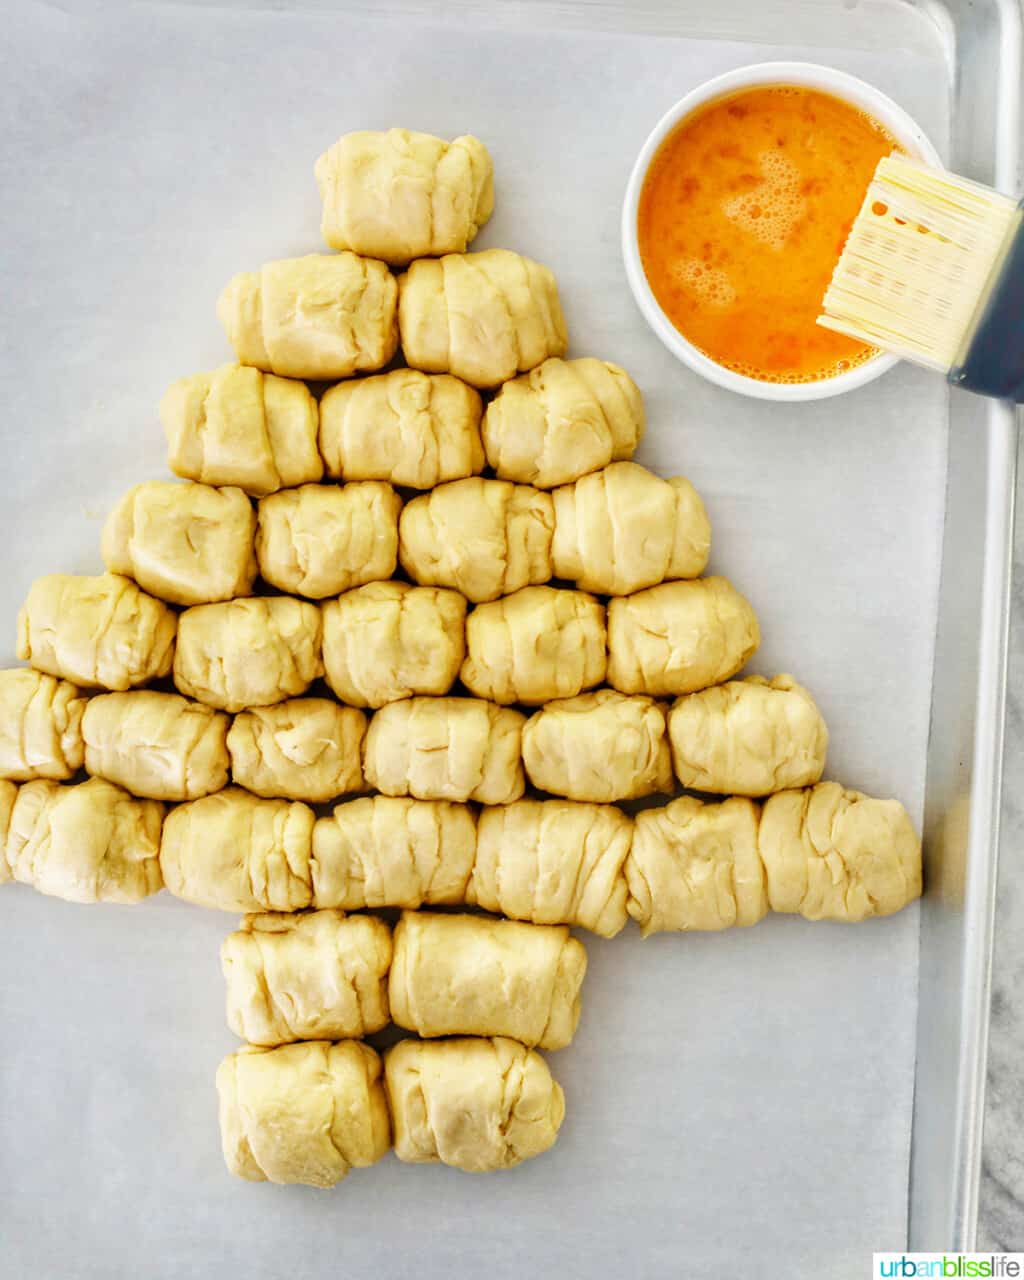 dough balls formed in shape of Christmas tree